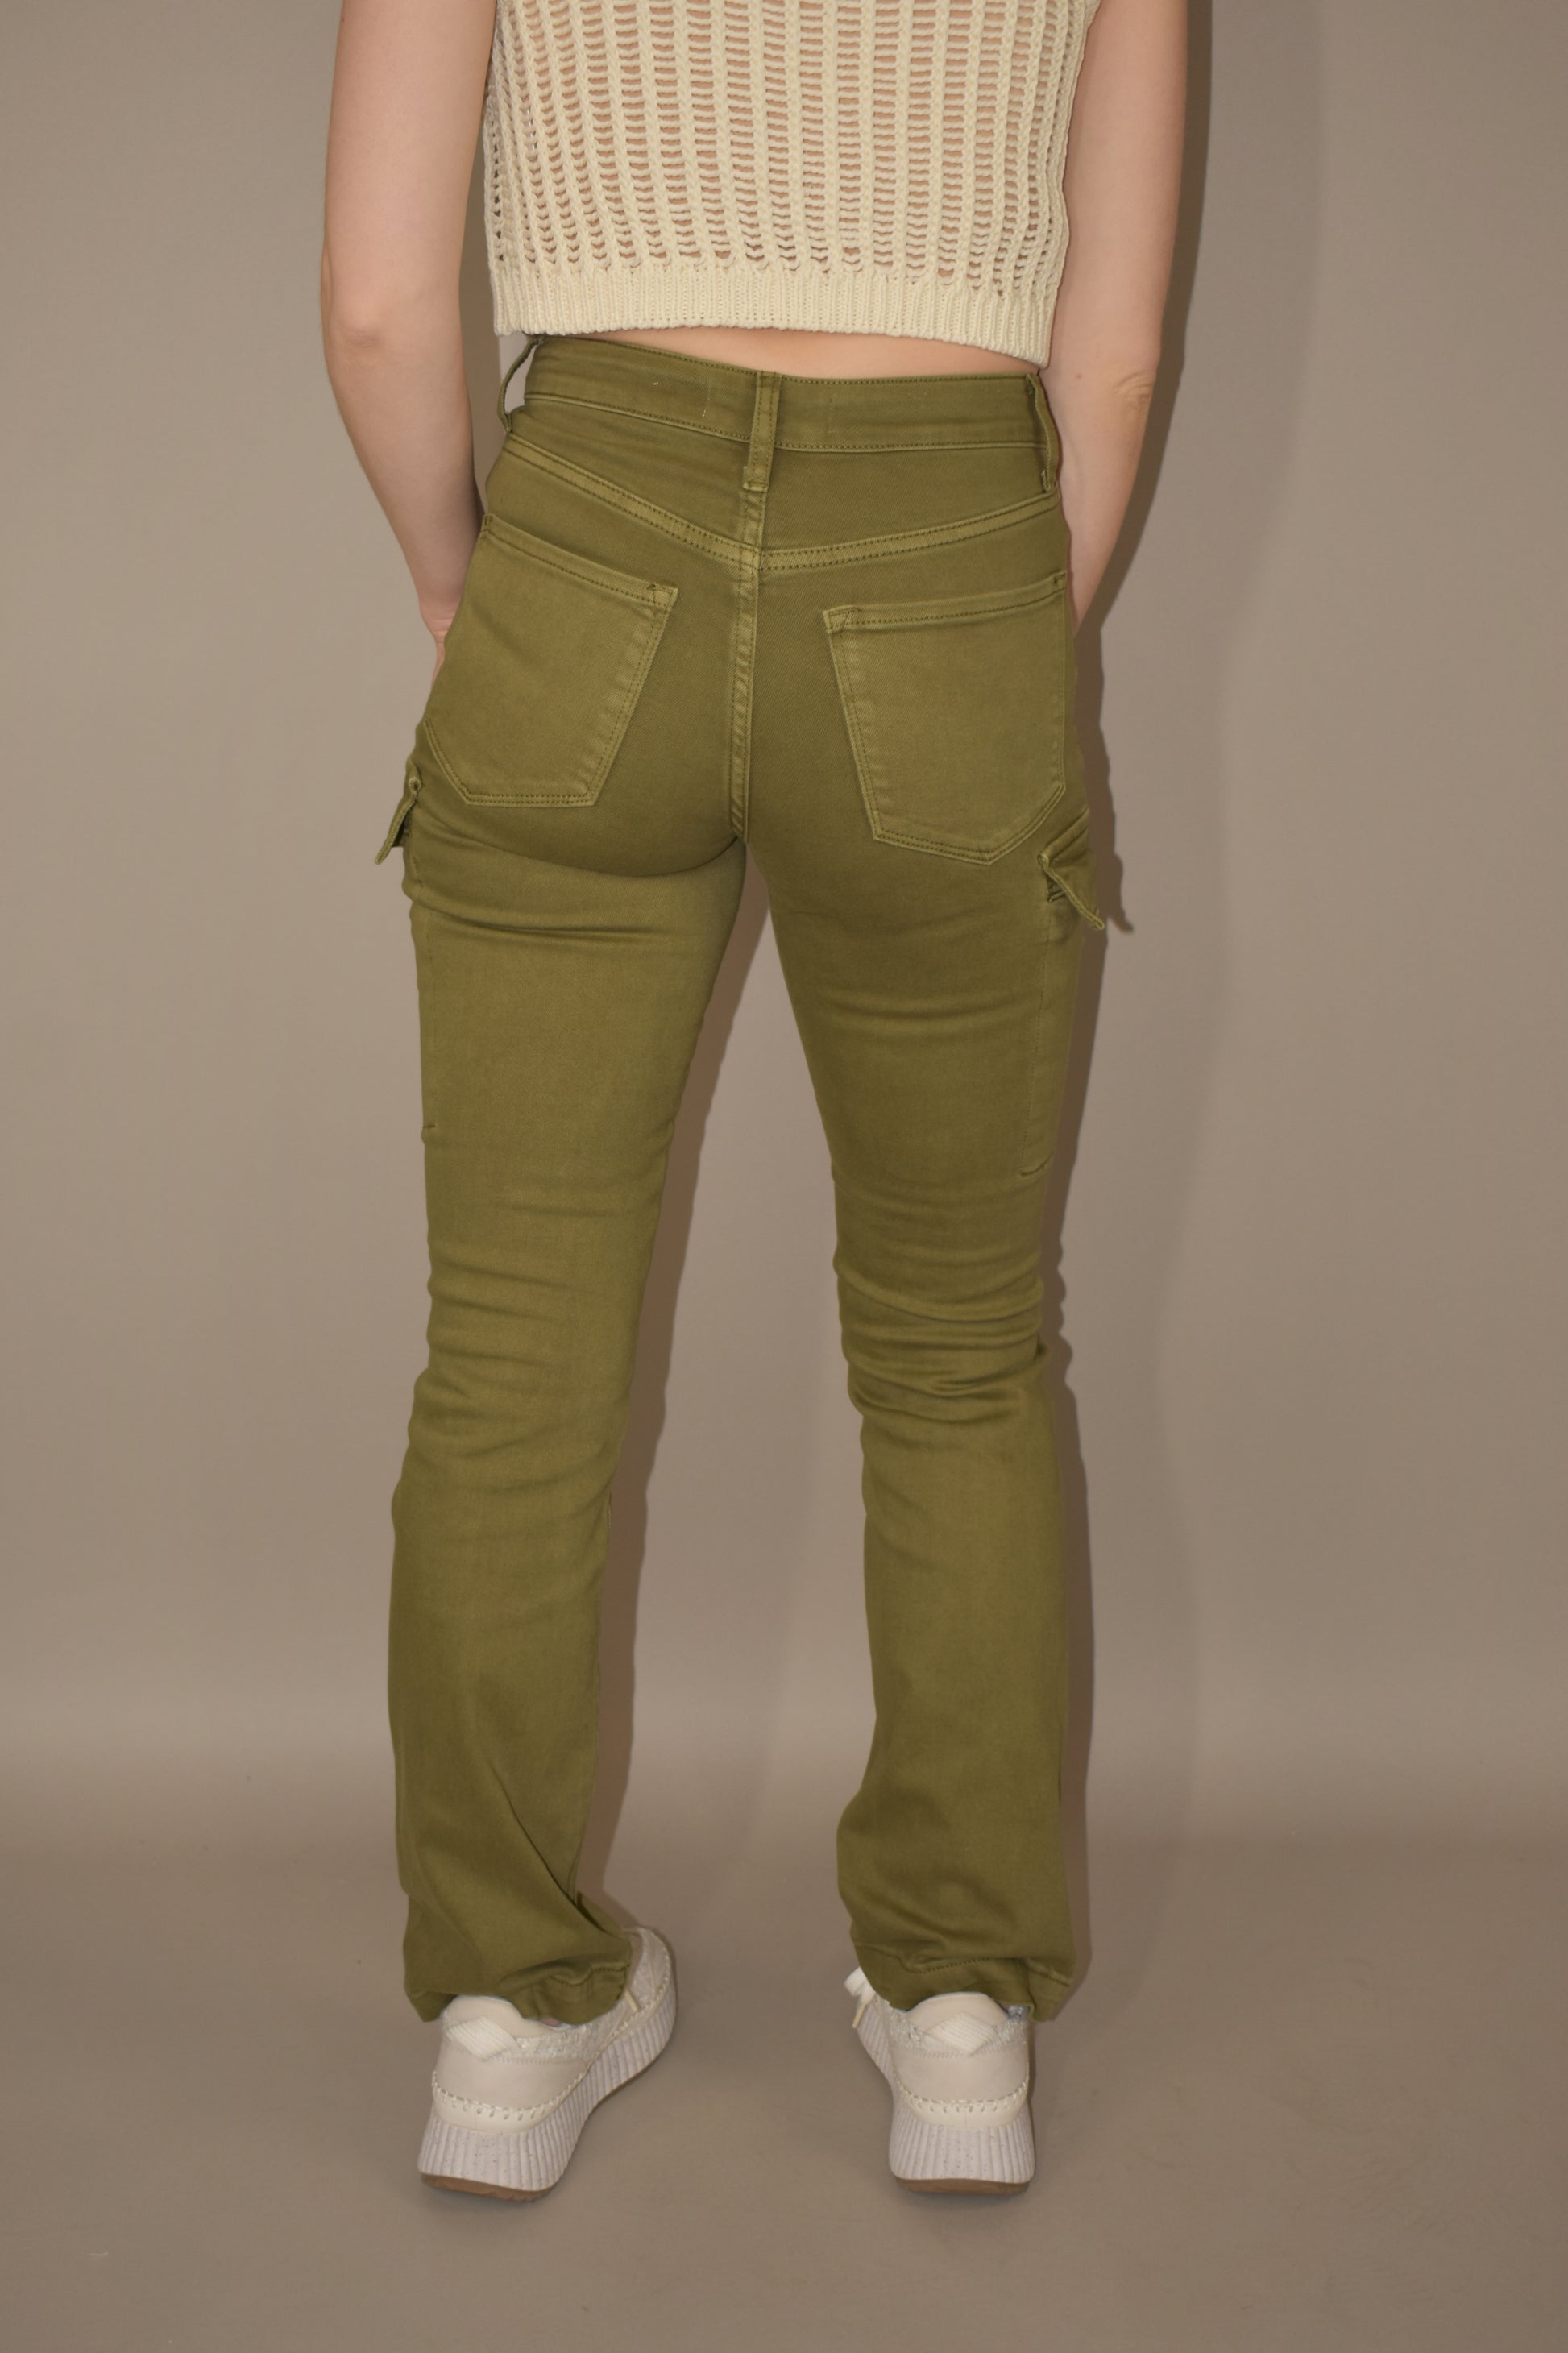 straight legged olive colored stretch denim with side cargo pockets flap enclosure front and back pockets no holes